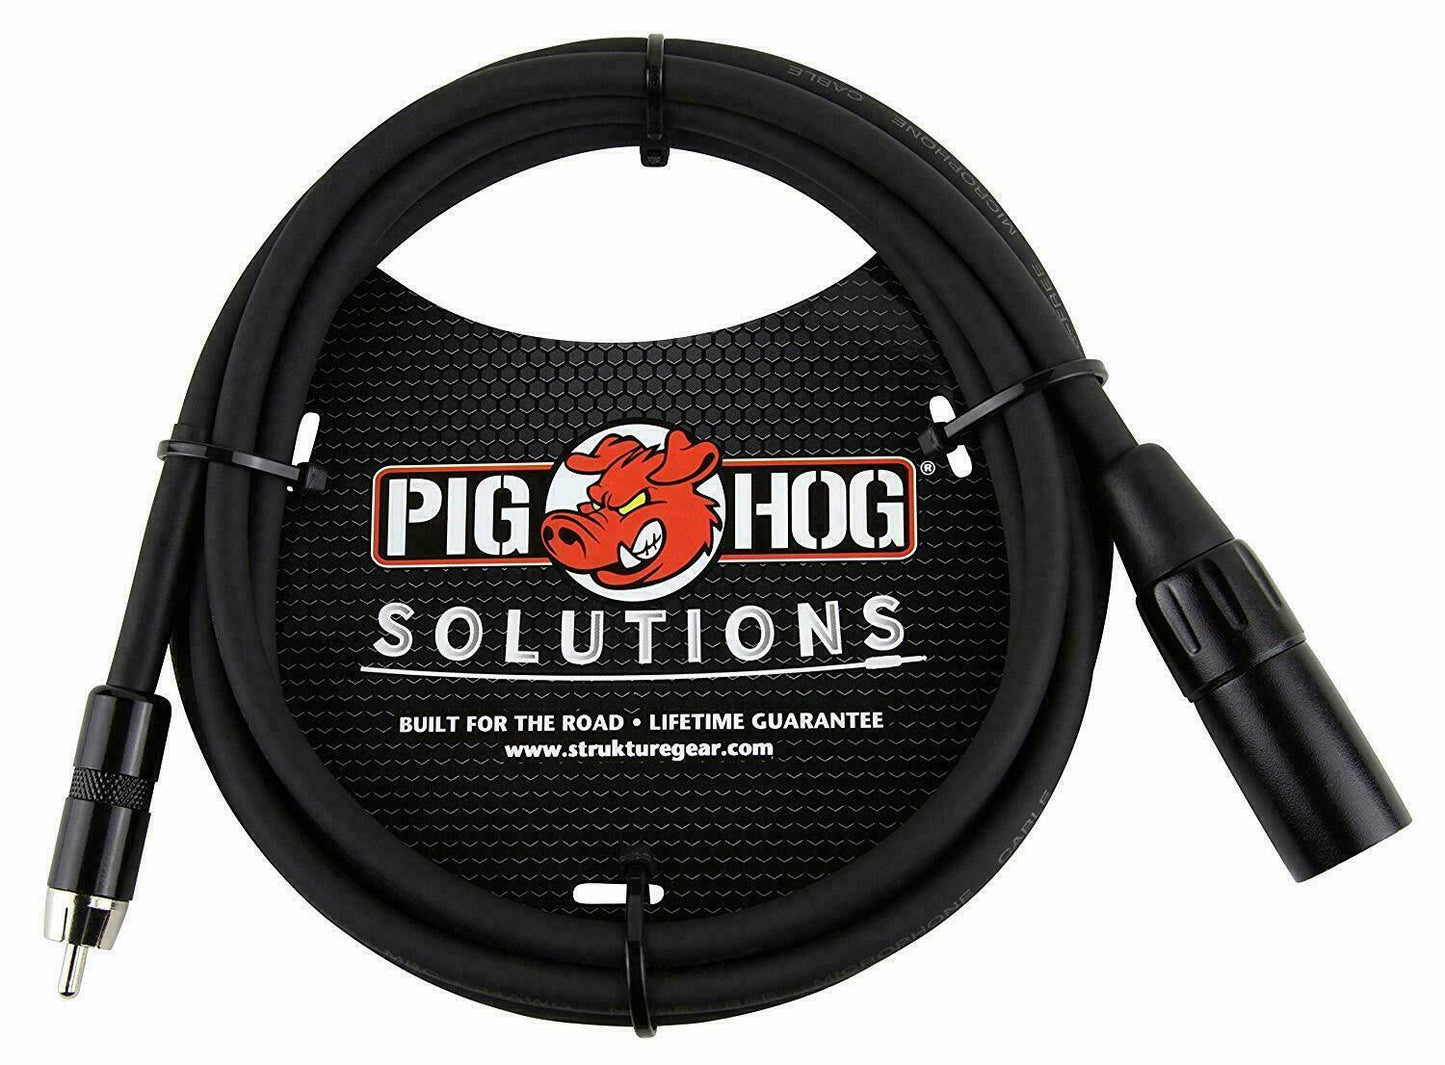 New - Pig Hog PX-XMR06 6 foot ft Solution XLR Male to RCA Male Audio Cable Adapter Plug Cord